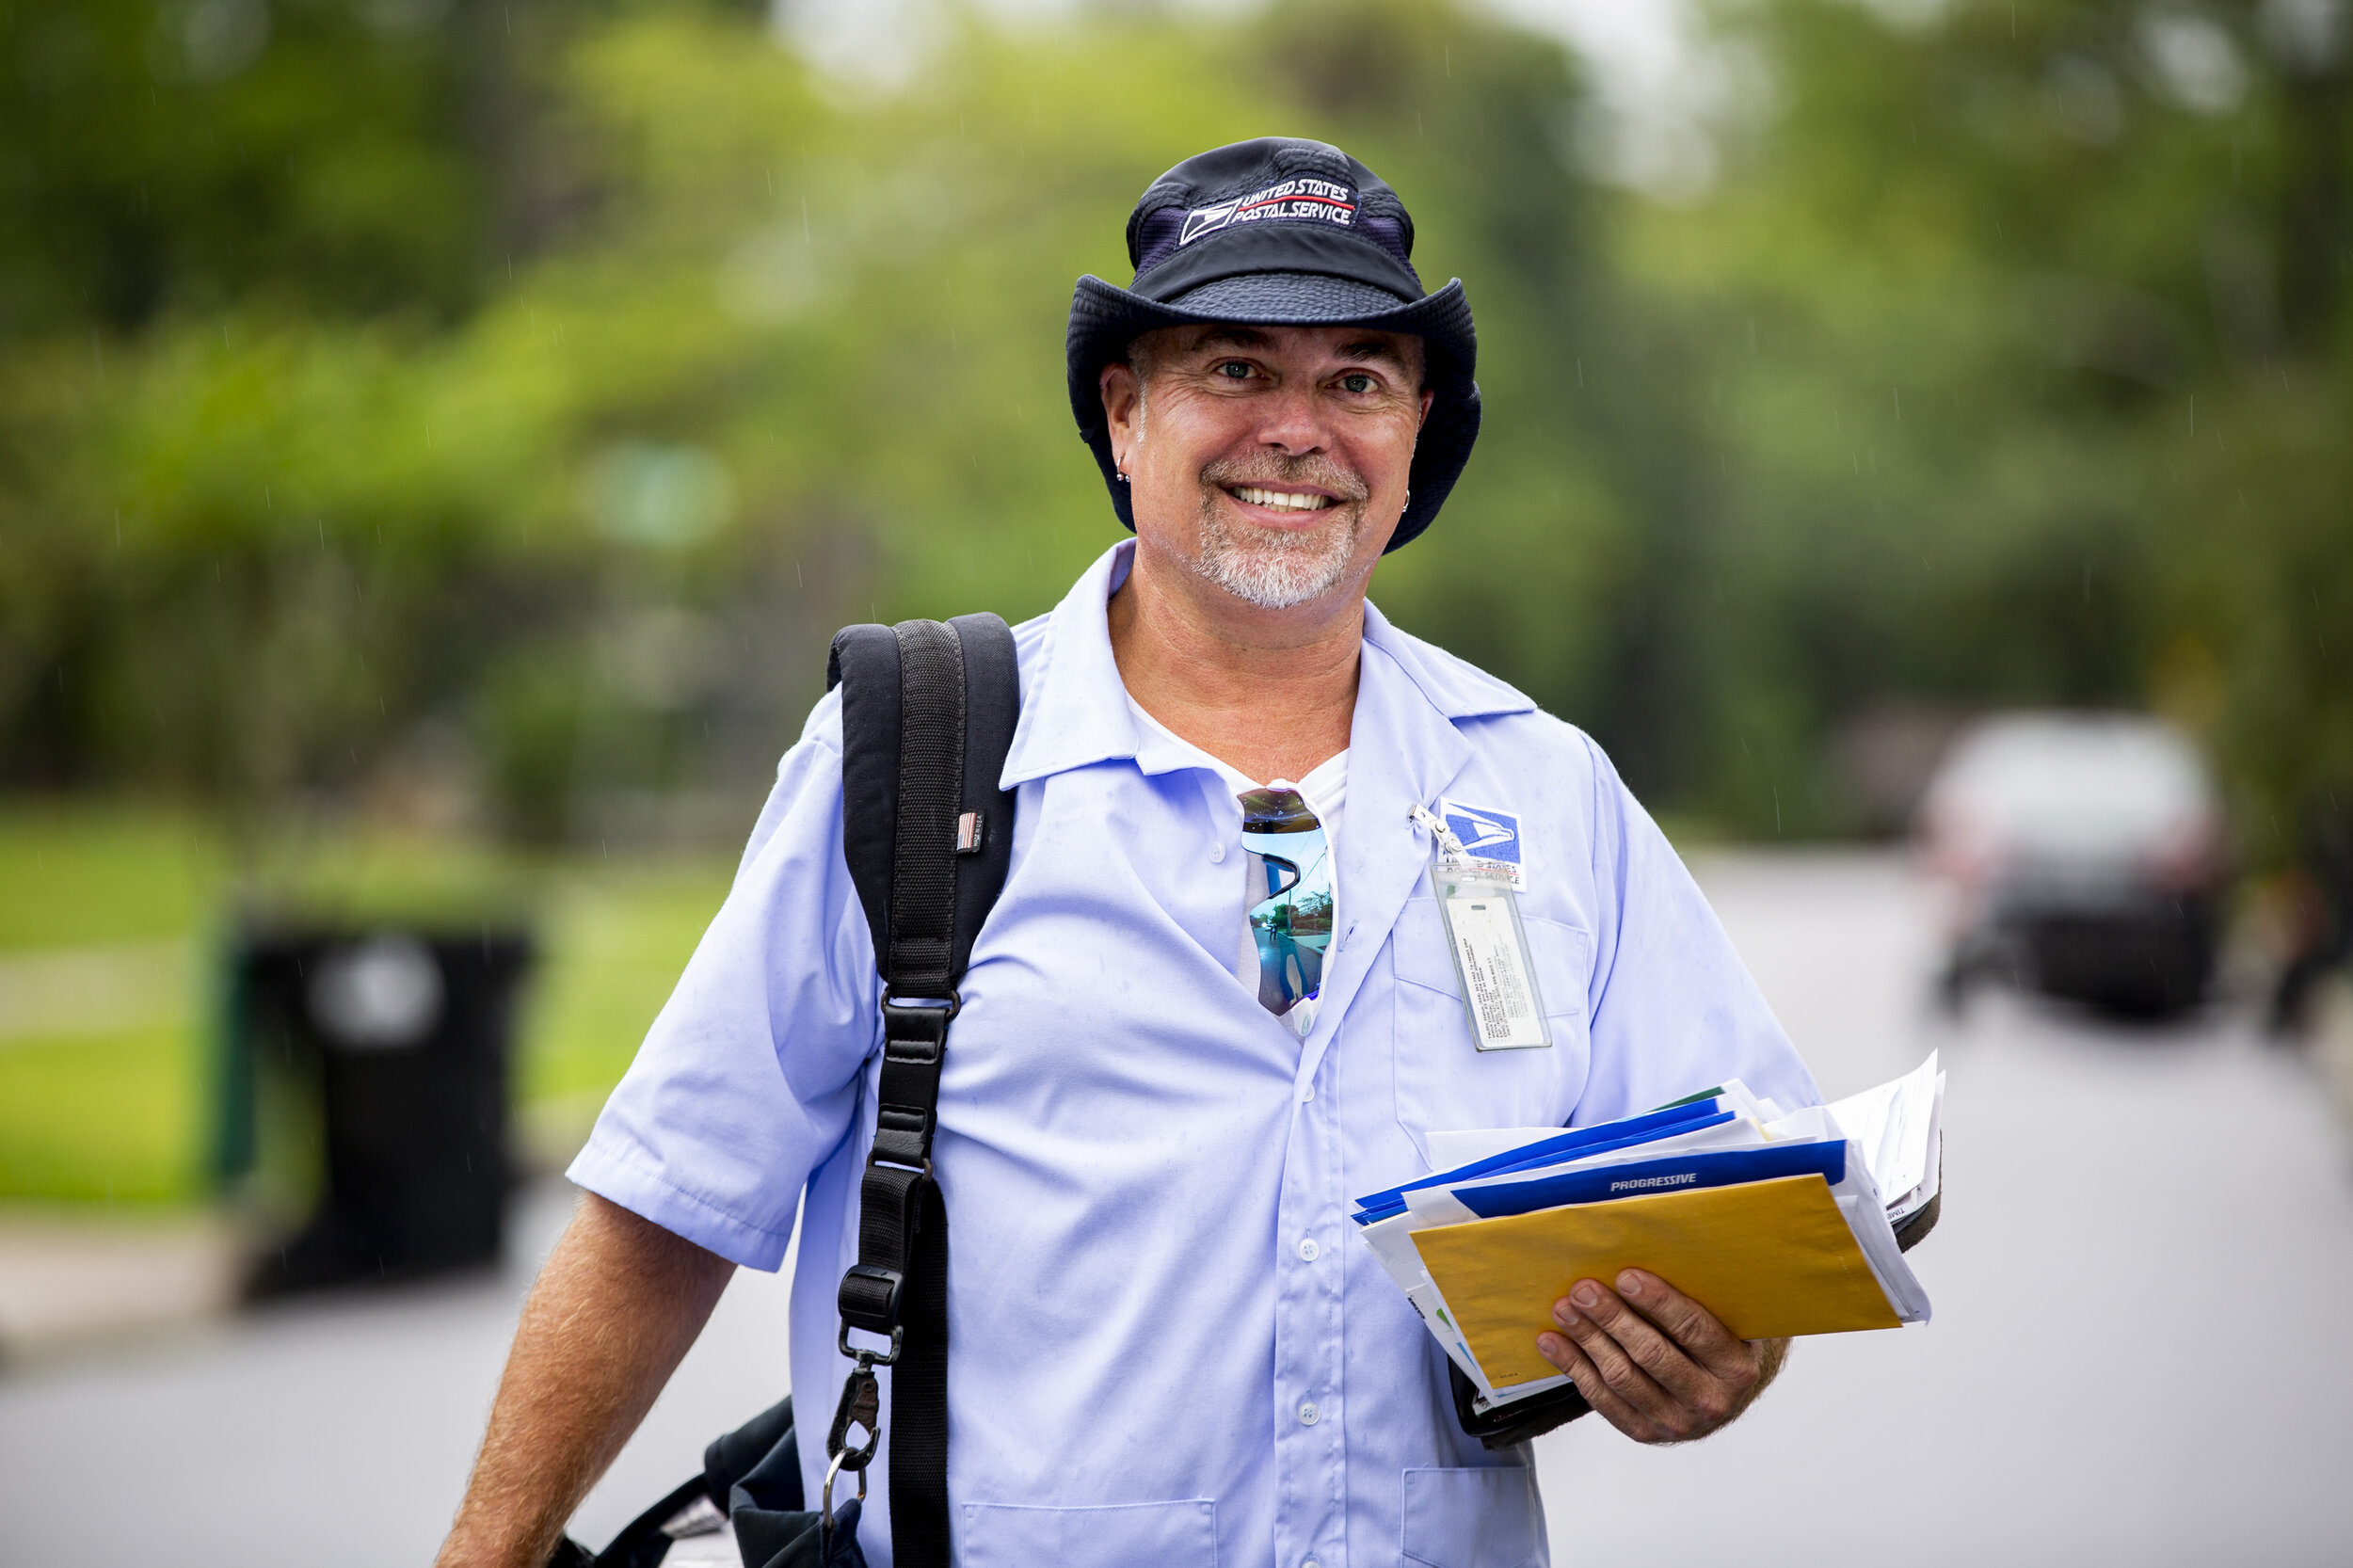  Andrew Hackney, letter carrier for USPS, said, "I have people that, unfortunately, I'm the only person they see each day. ... When you're on someone's porch, day in and day out year after year, you get to know them like family. To be a little bit of